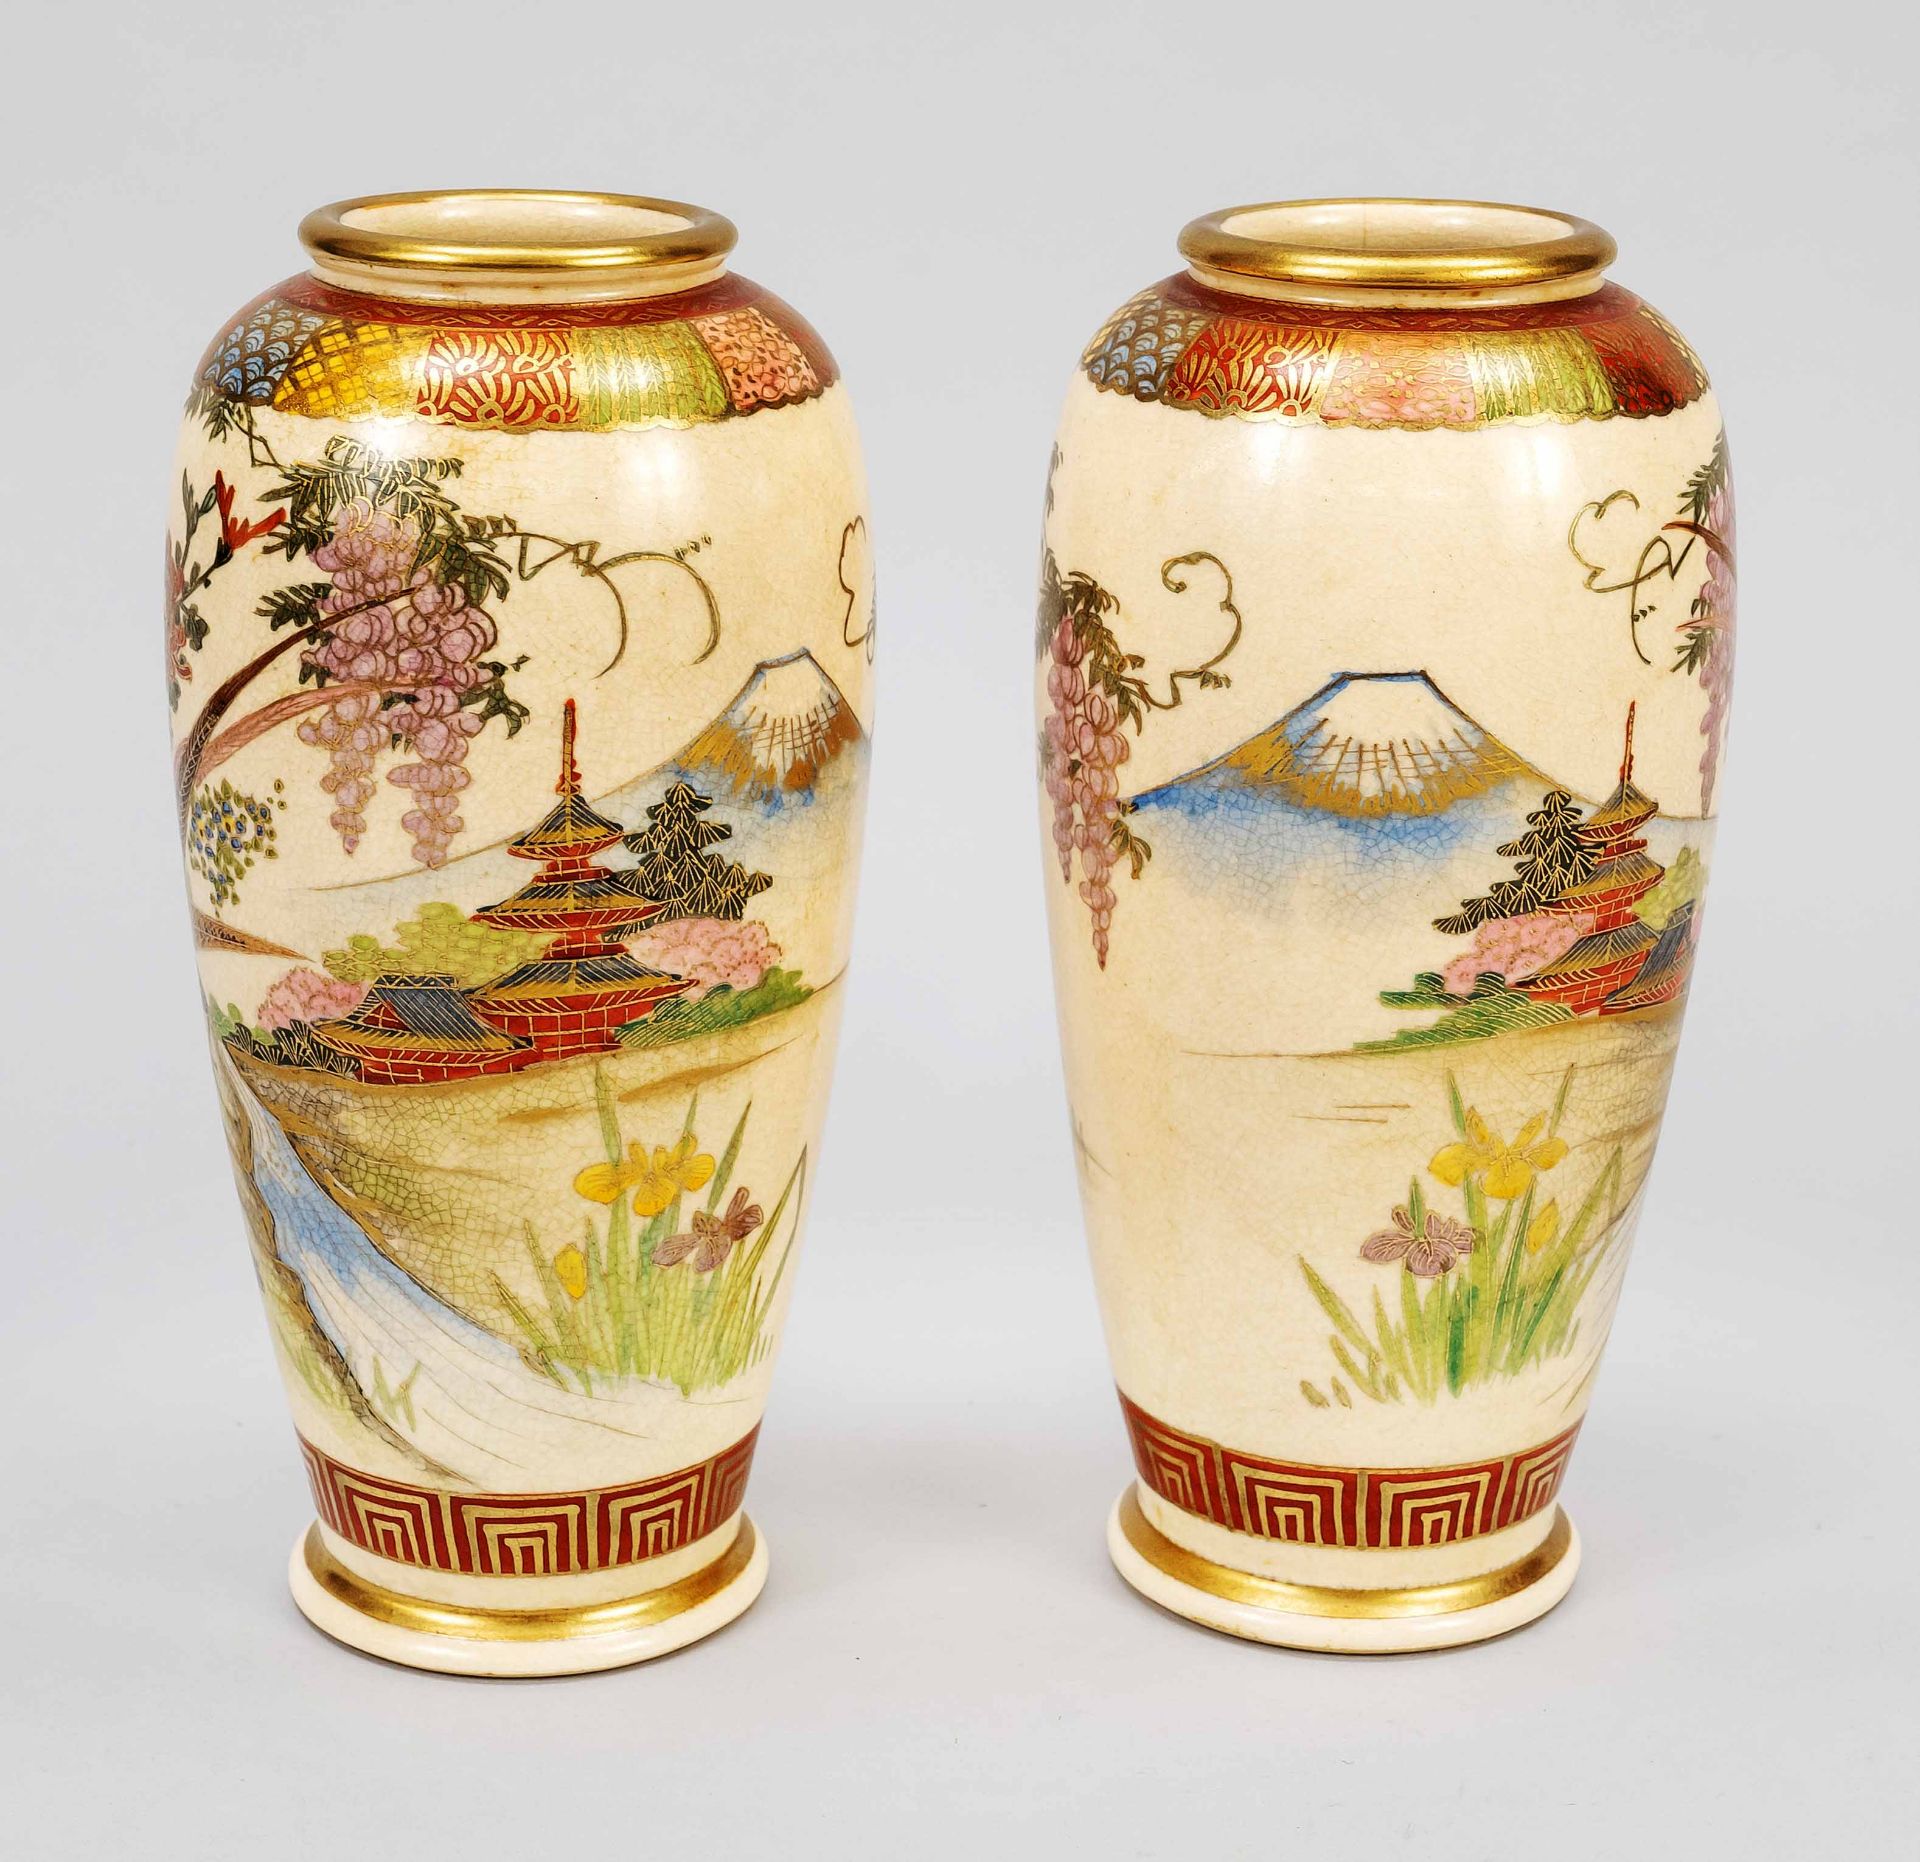 Pair of Satsuma vases, Japan, 20th c., beautiful large flower vases with ivory colored body and fine - Image 2 of 3